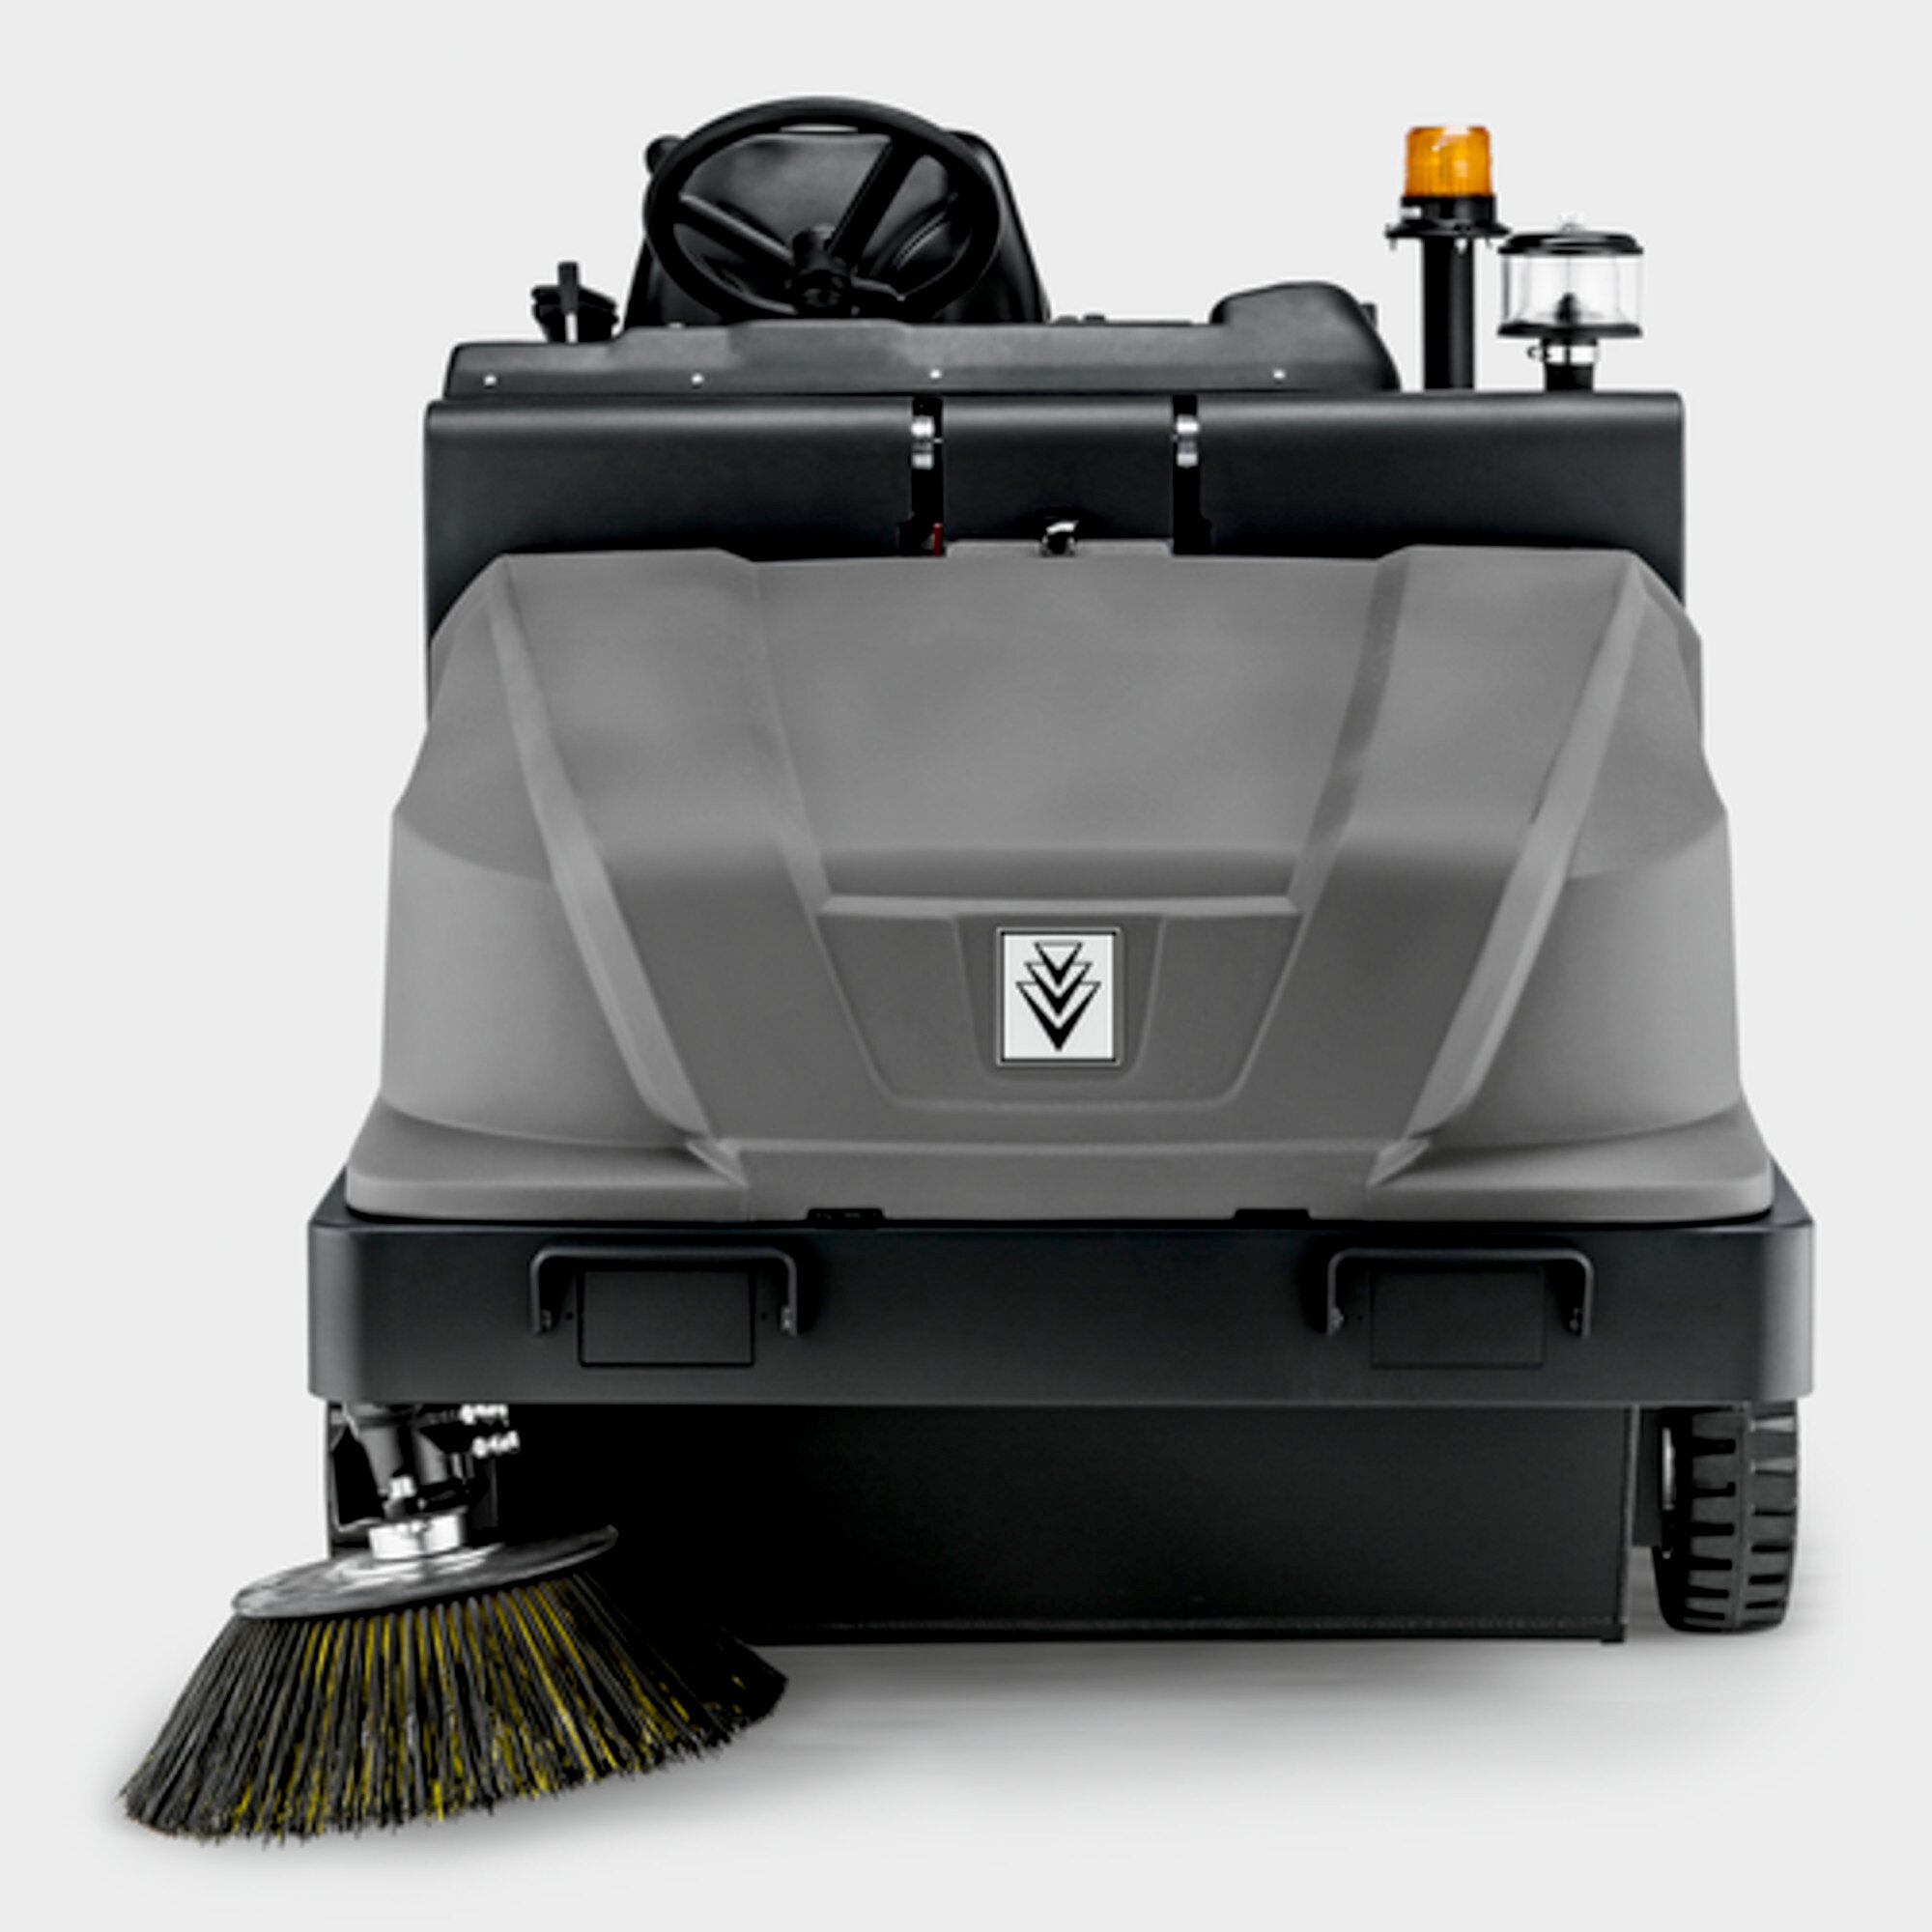 Vacuum sweeper KM 130/300 R D Classic: Hydraulic rear-wheel drive with solid rubber tyres